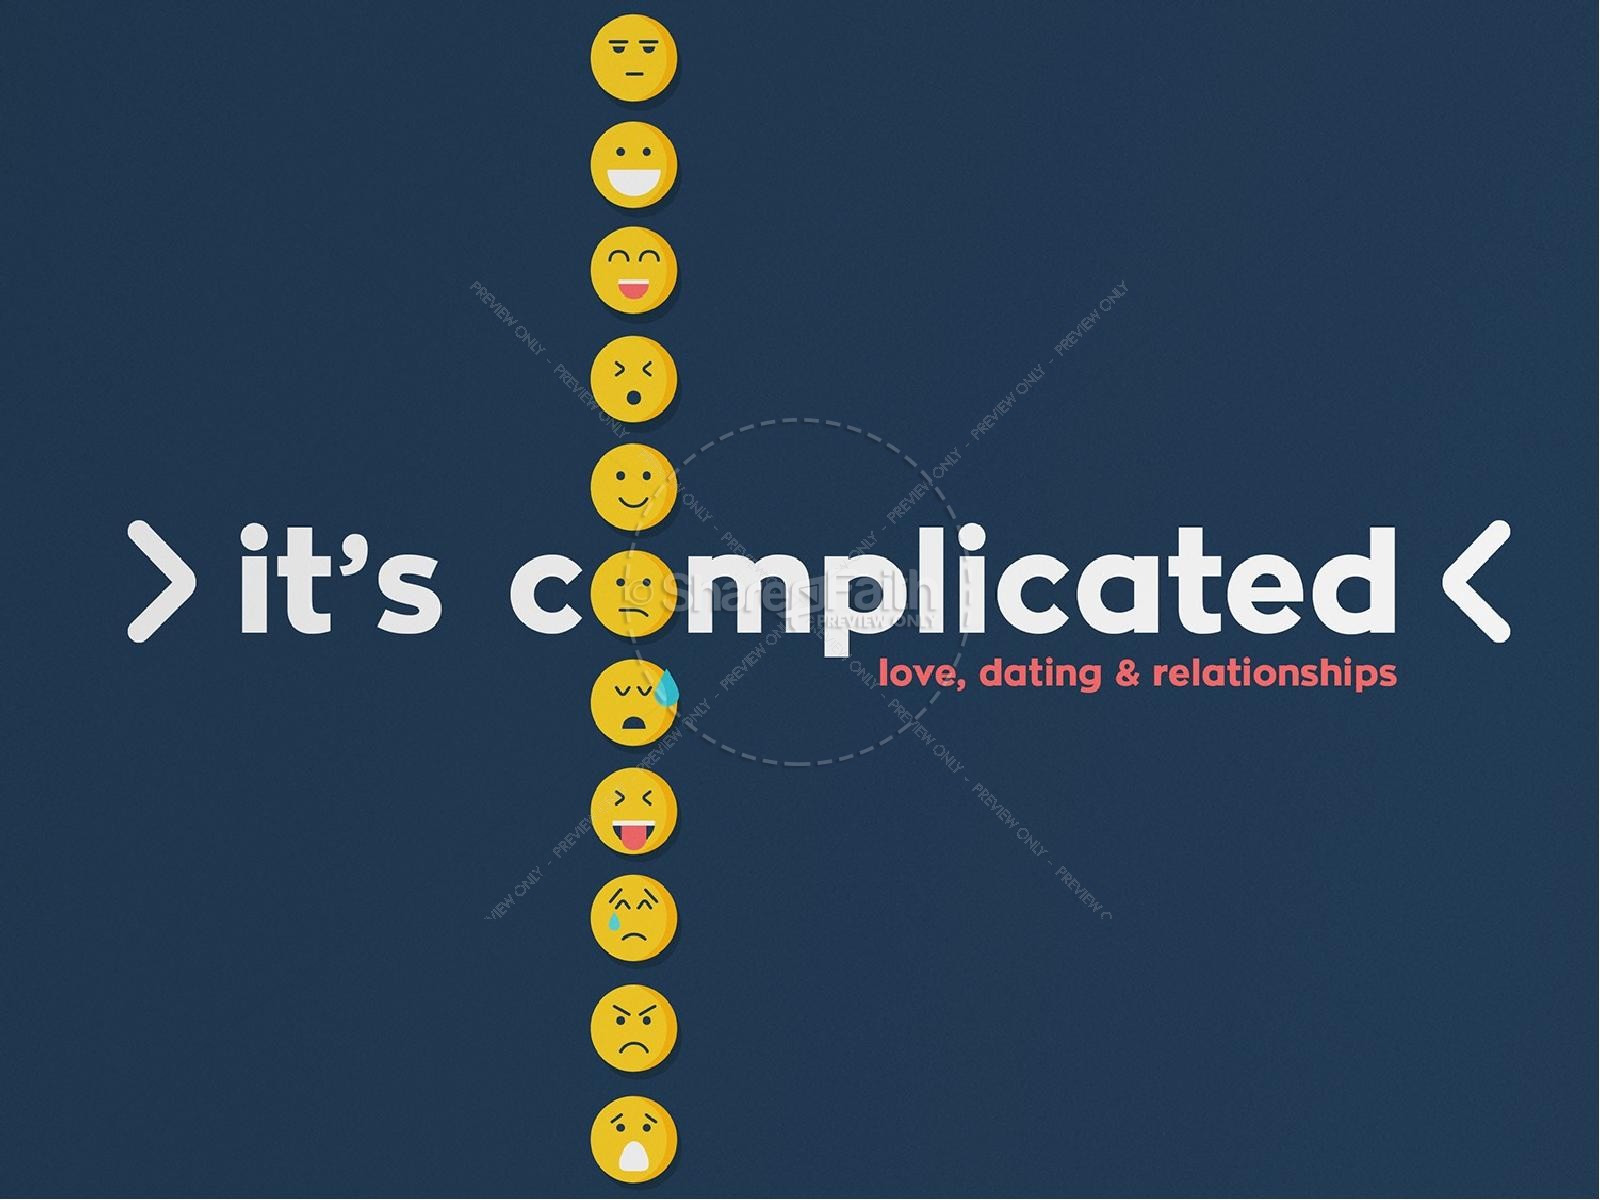 It's Complicated Relationships Church PowerPoint Thumbnail 1